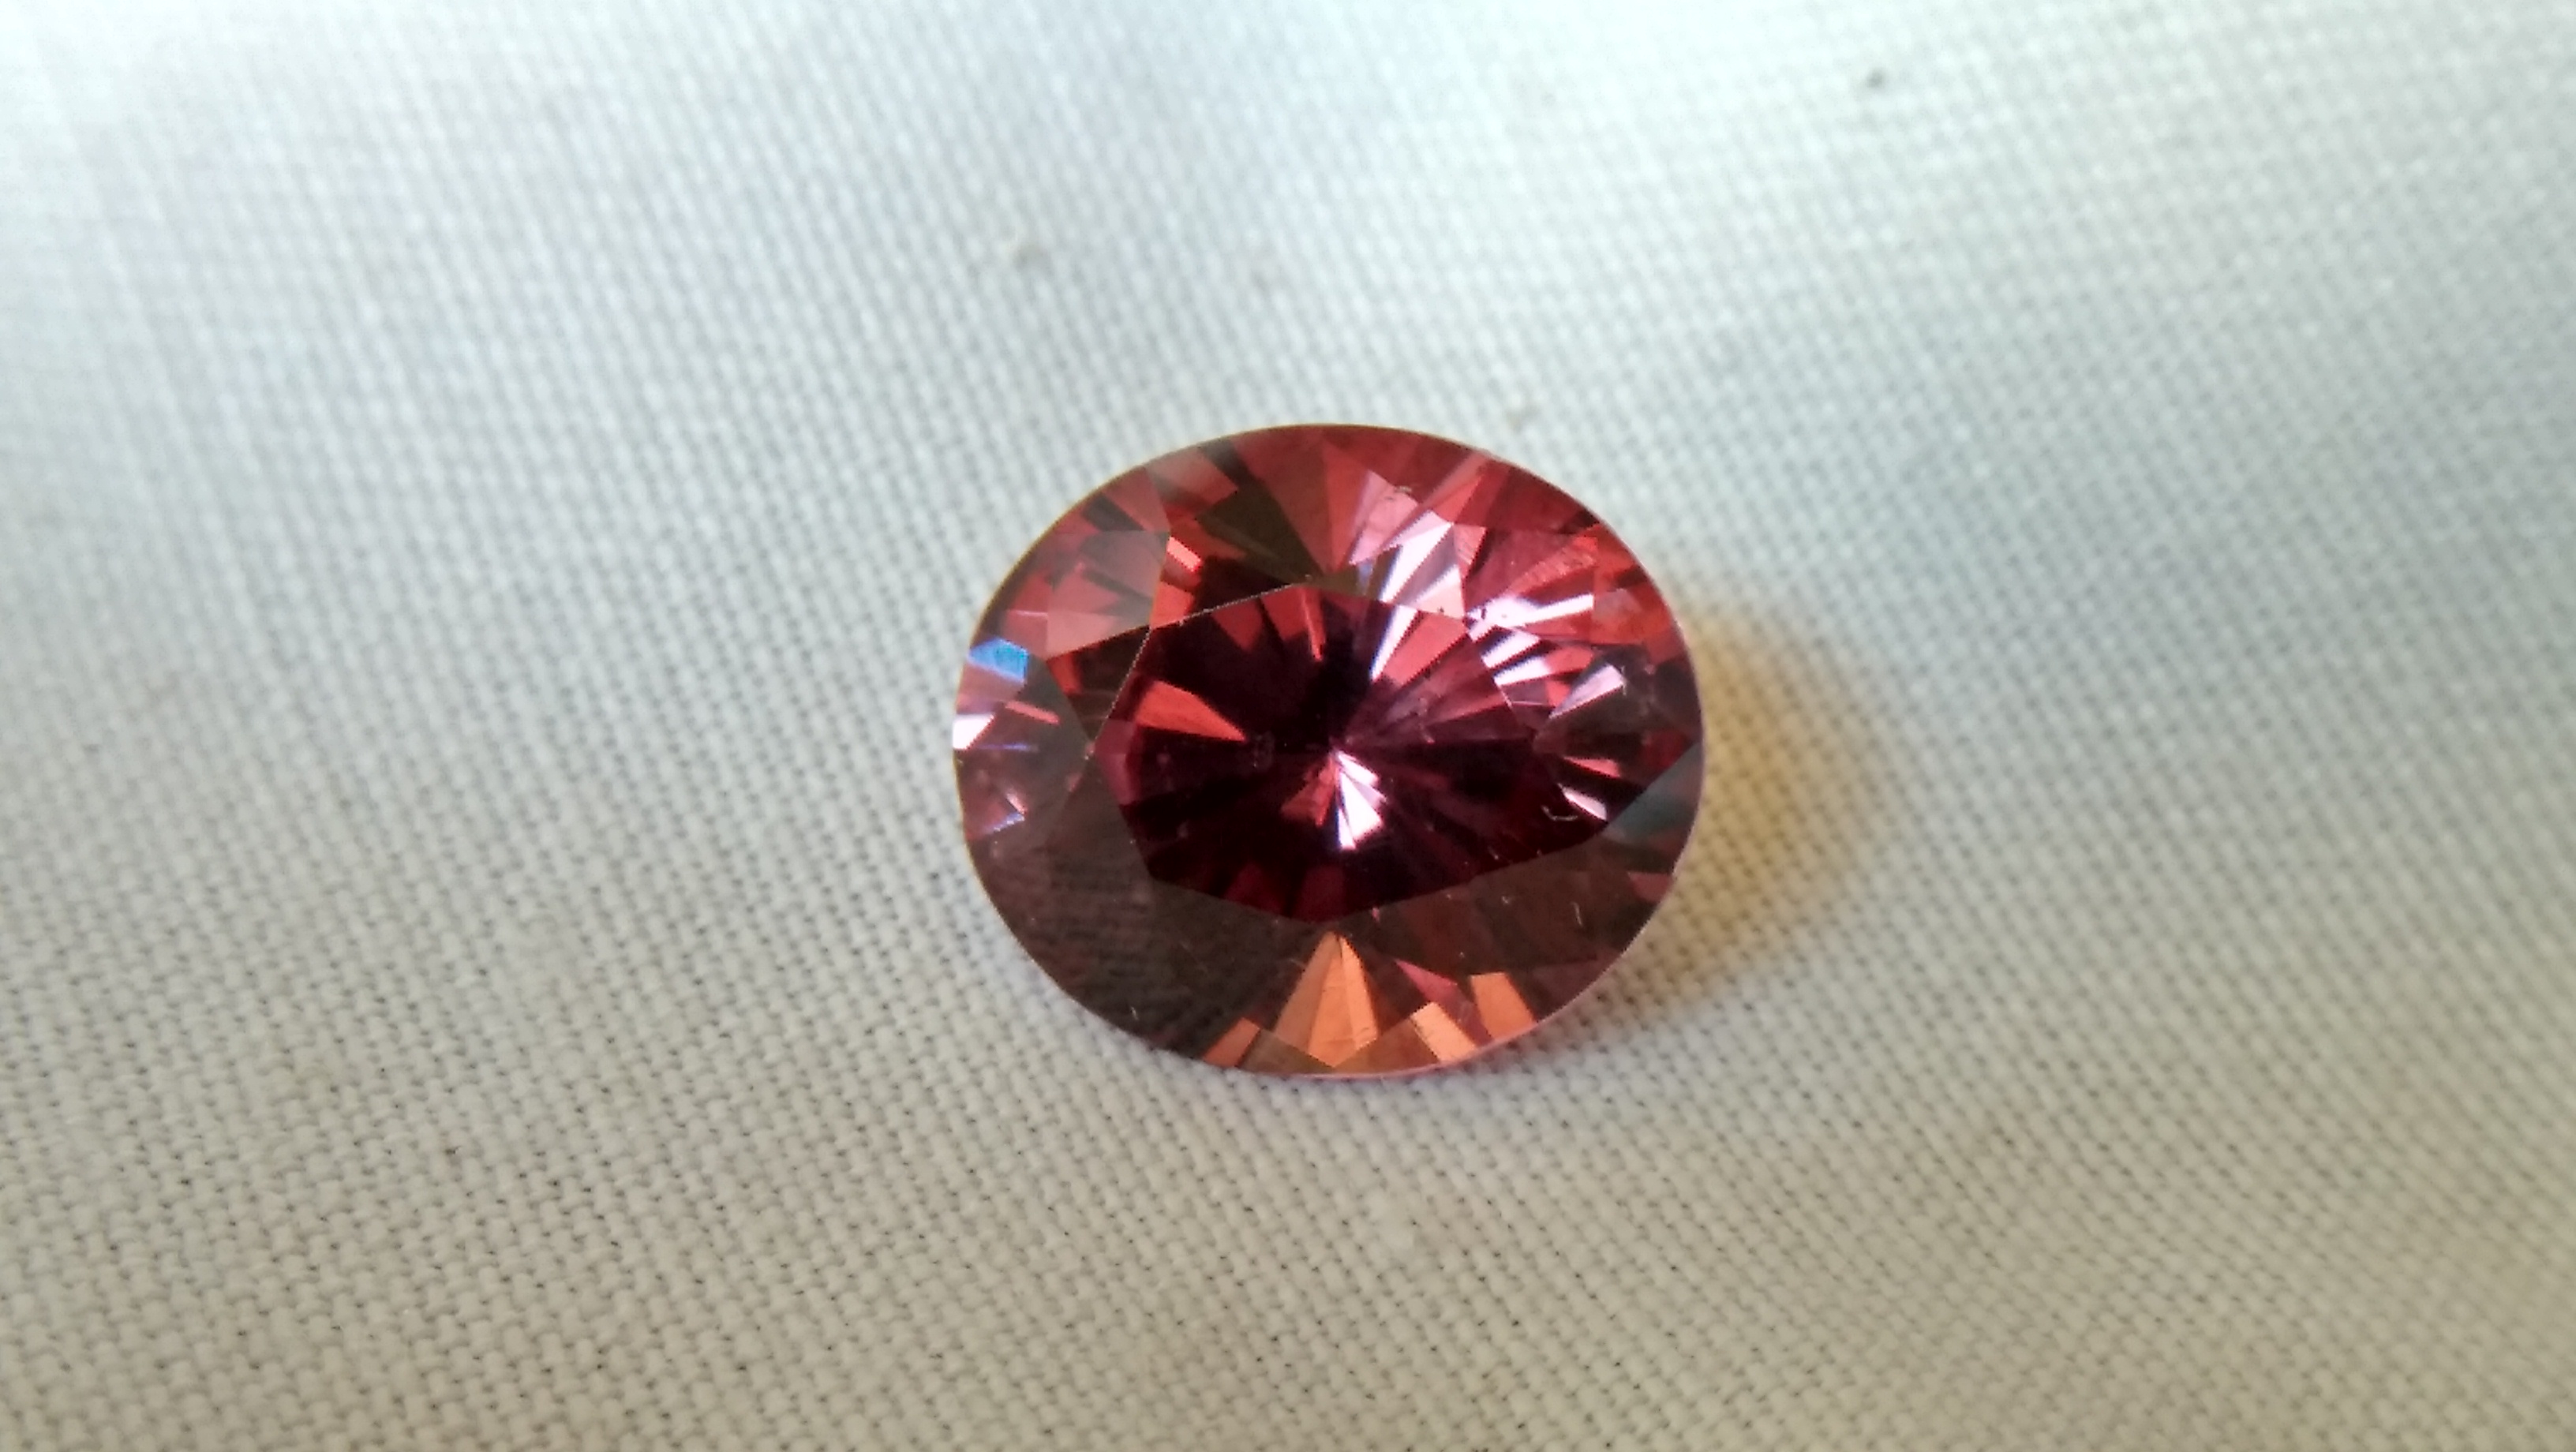 Natural Colour Change Garnet Weight: 3.19Cts Dimension: 9.7mm x 8.31mm x 5.8mm Colour: changing colors Brown, Brownish purple, Orangy Red Clarity : SI Birthstone : January Treatment : None/ Natural